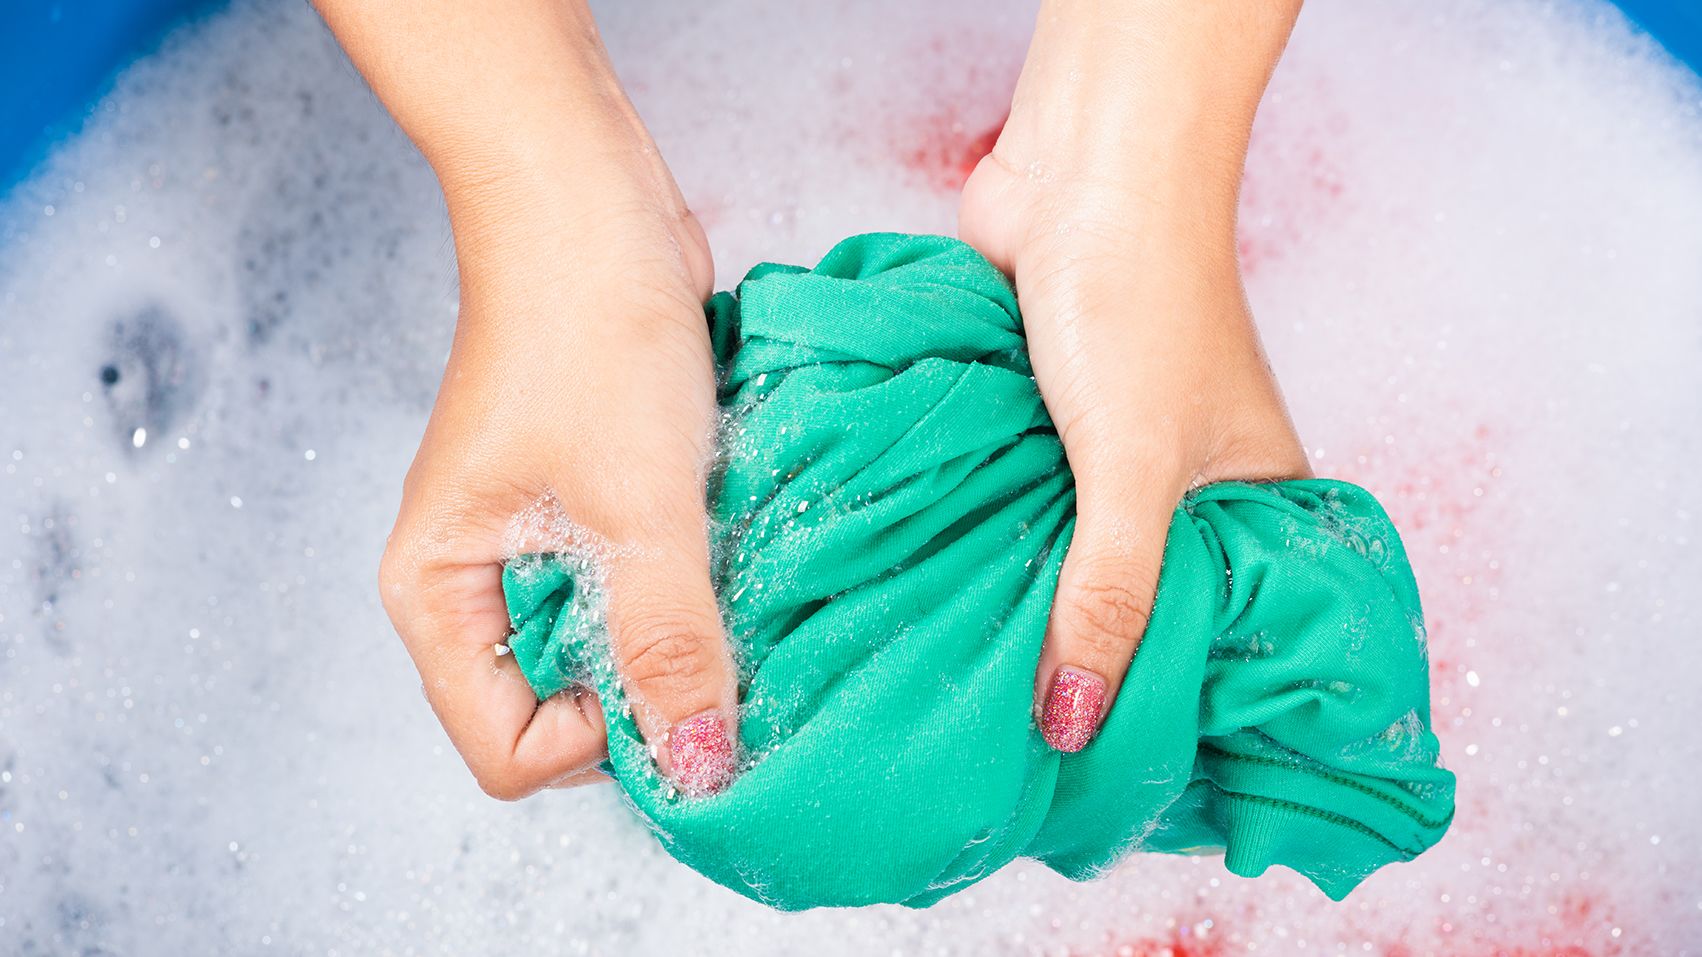 How to wash clothes by hand – hand wash underwear, sweaty clothes and more